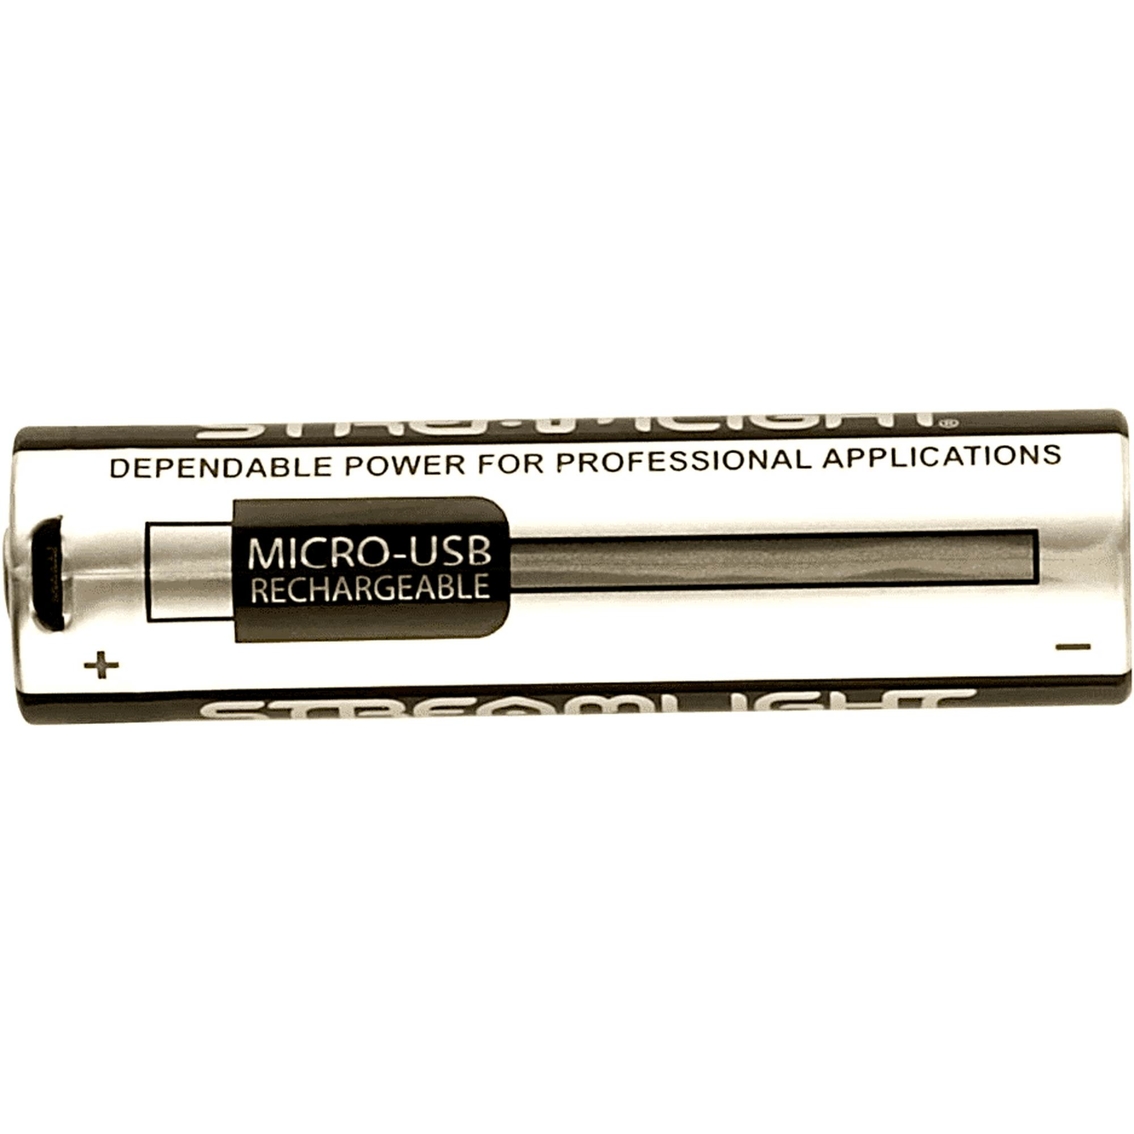 Streamlight 18650 Lithium Ion USB Rechargeable Battery Two Pack - Image 4 of 4